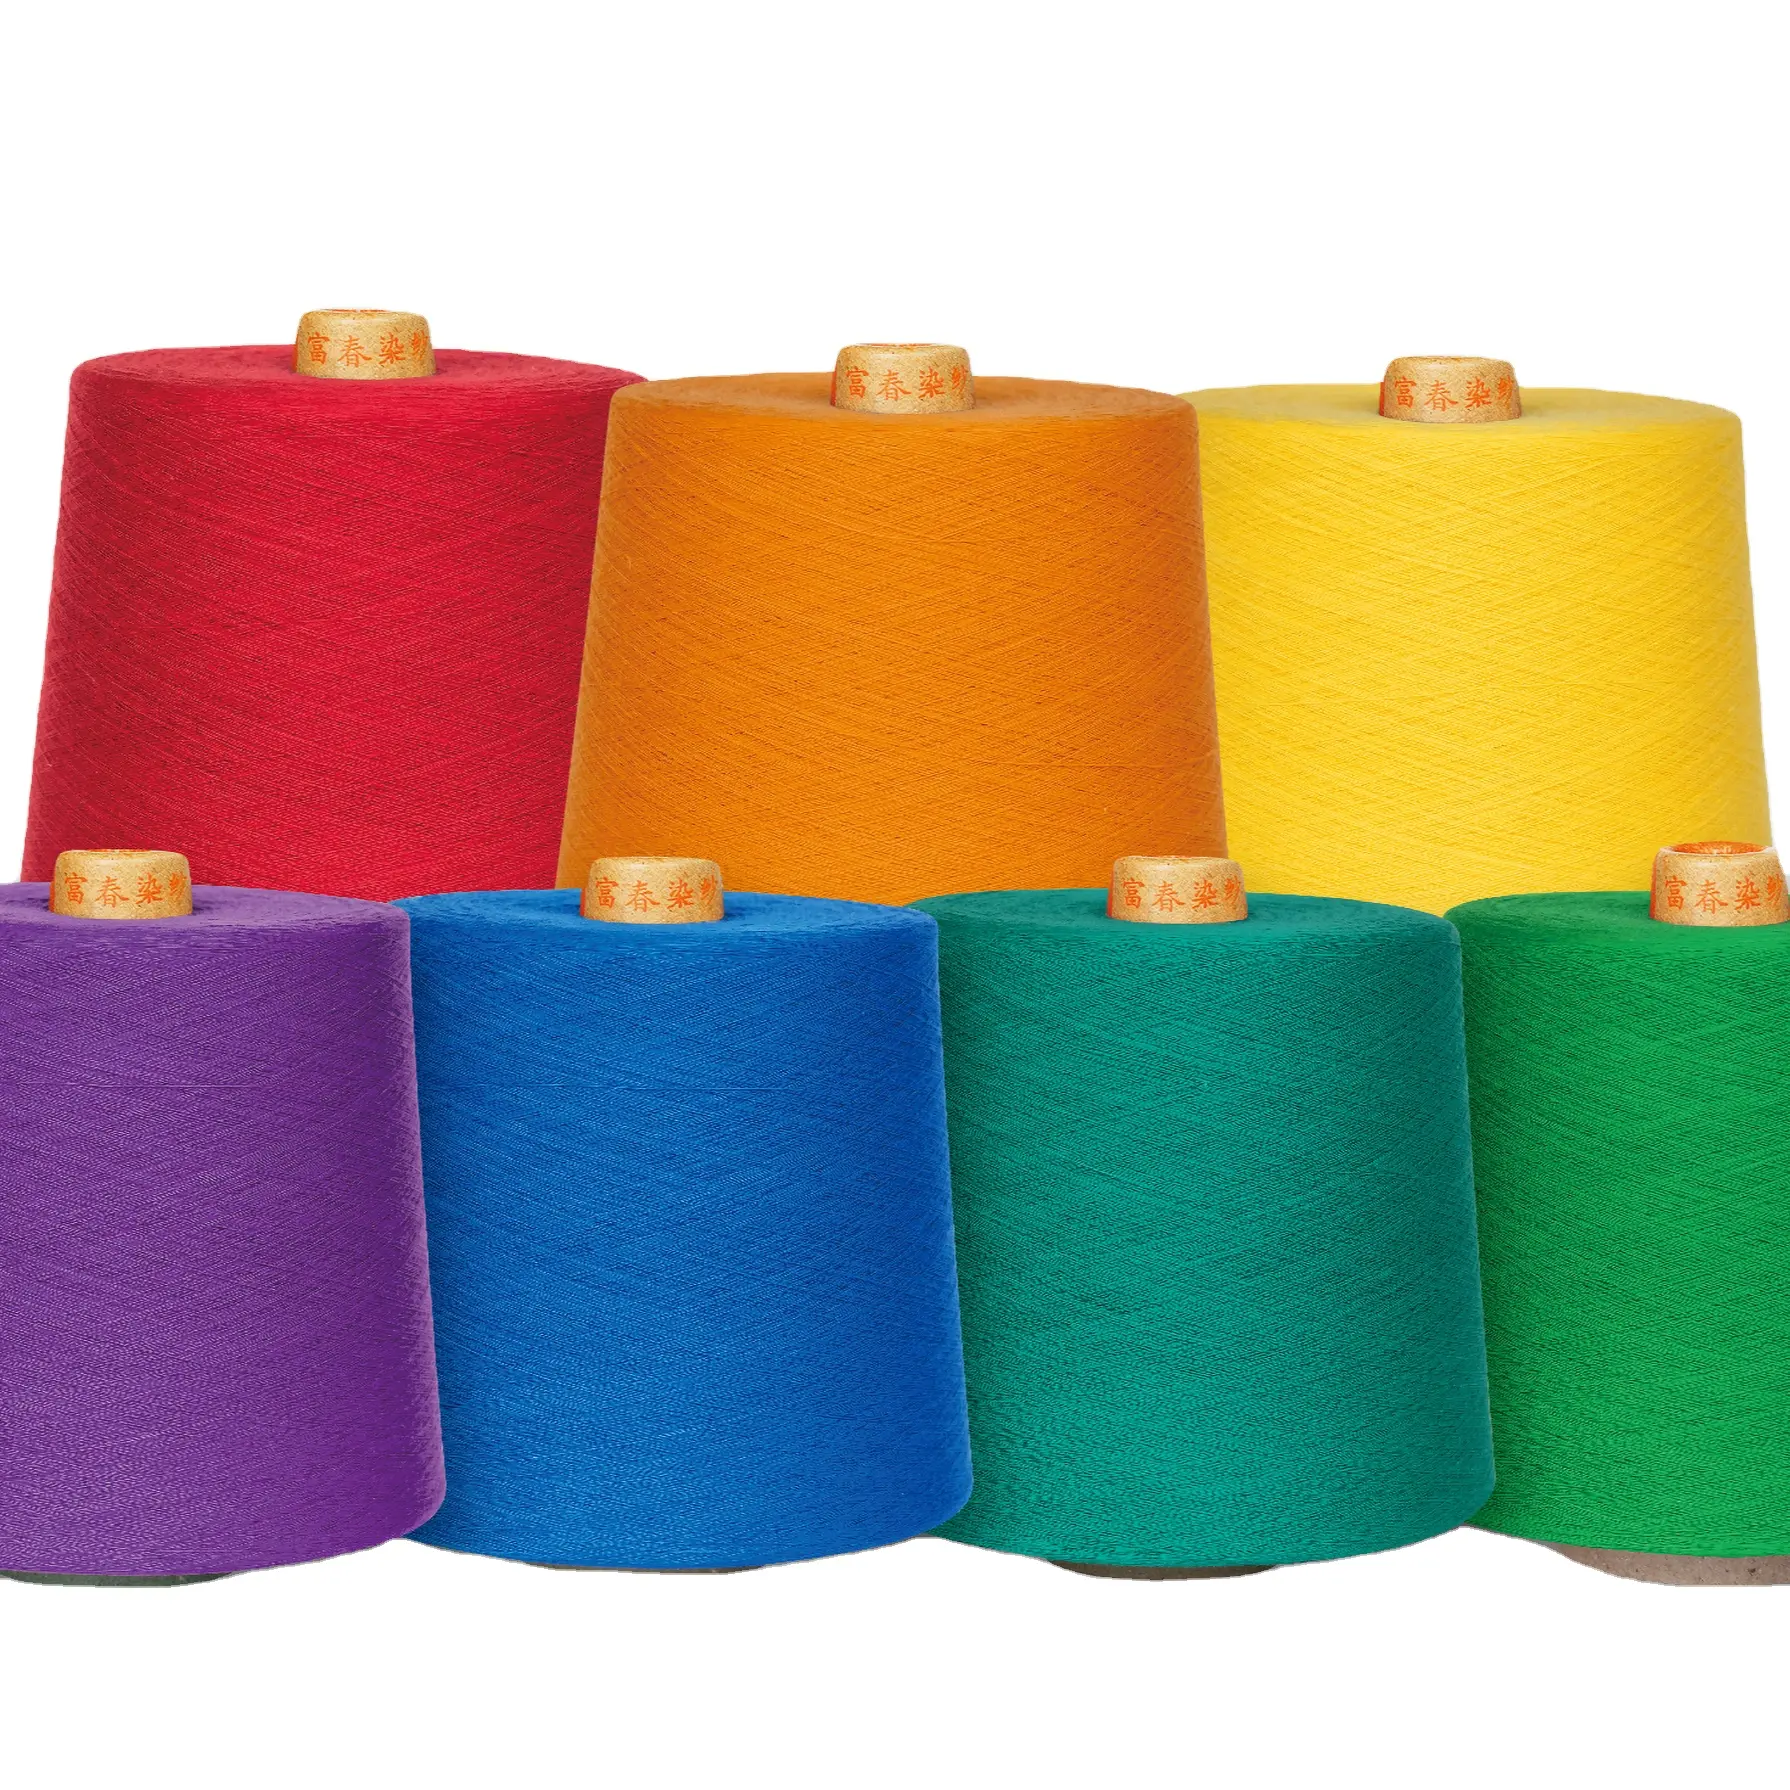 100% cotton combed carded Ne20/1 30/1 40/1 yarn for knitting and weaving in 580+ colors